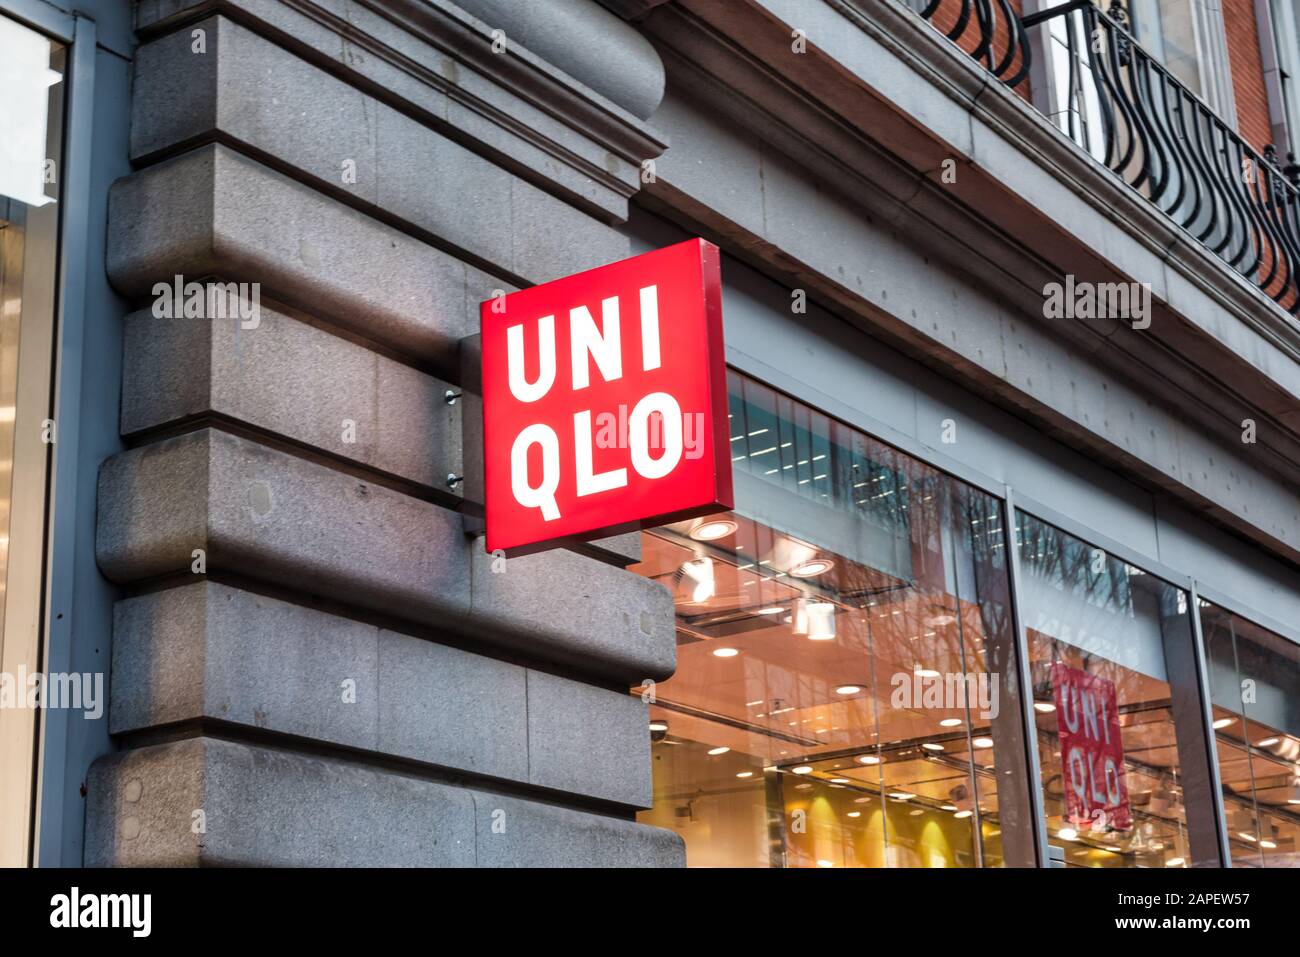 London, UK - Jan 16, 2020:  The front of the UNIQLO clothing store on Oford Street in London Stock Photo